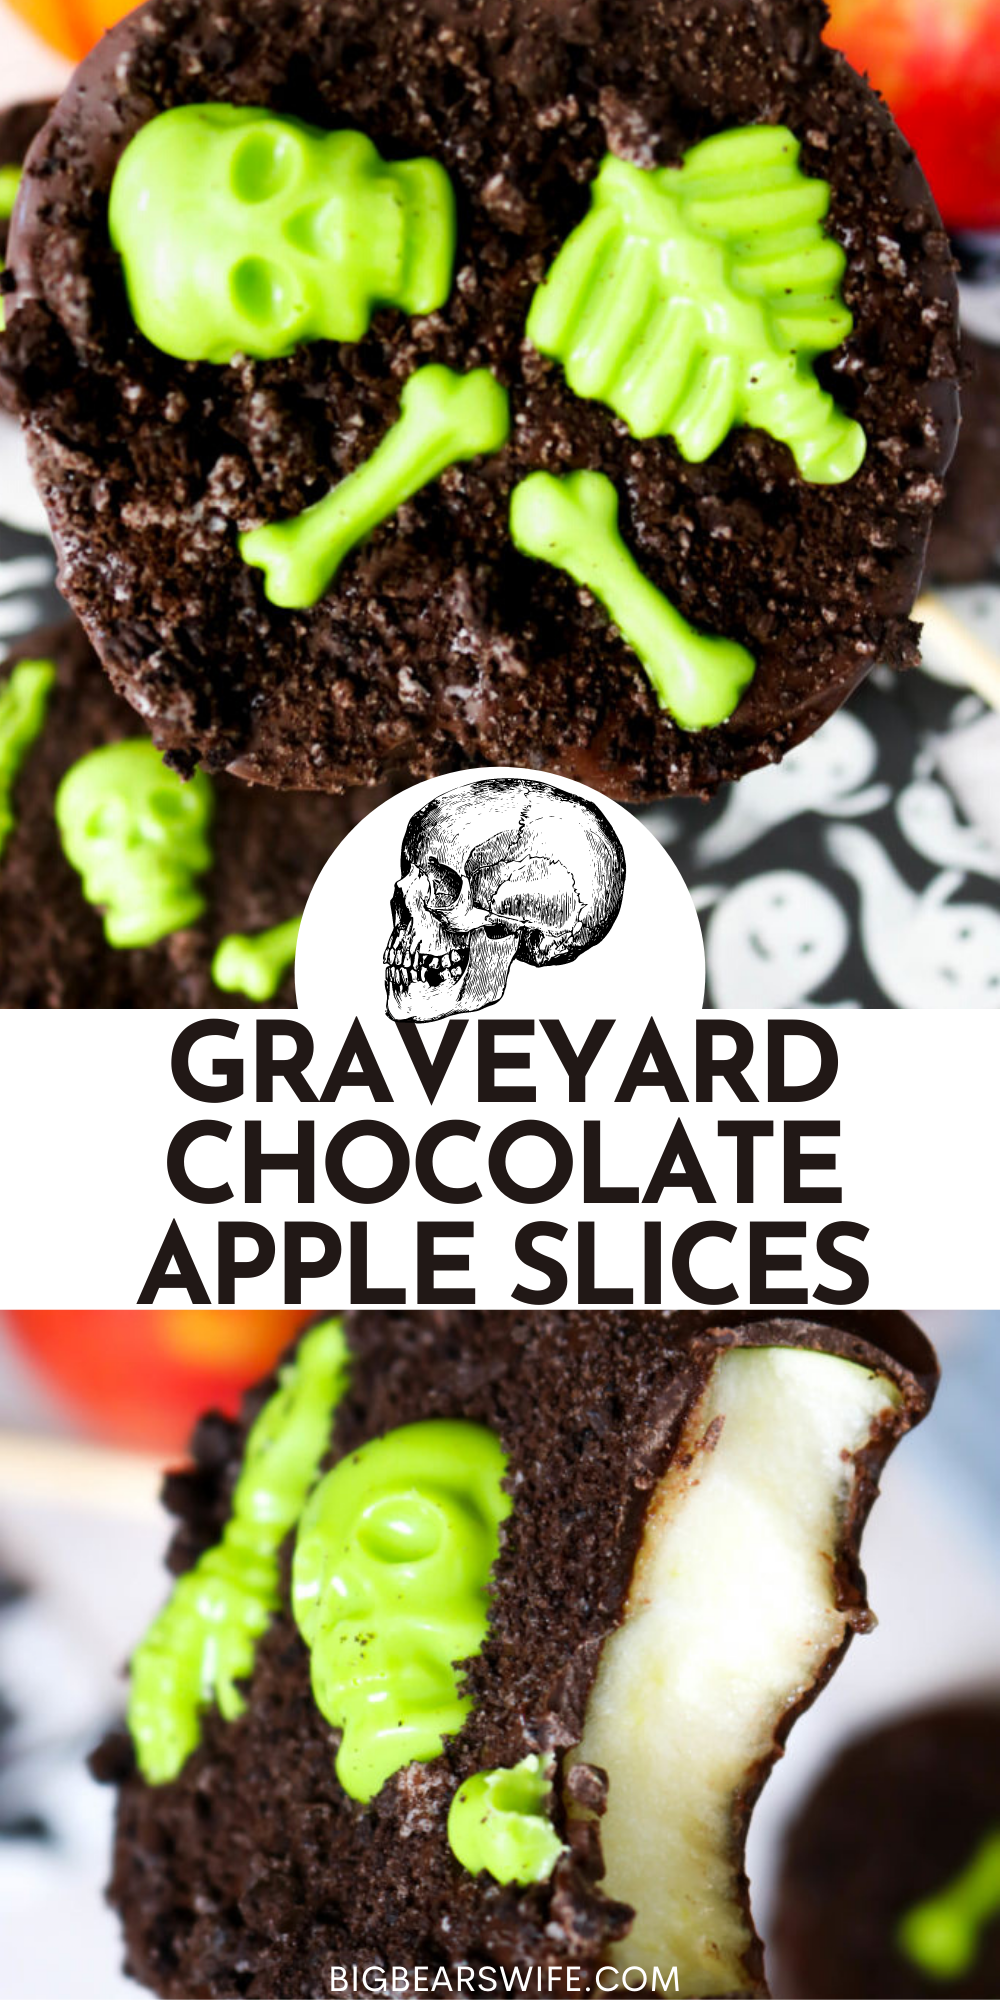 Melted chocolate and candy skeletons decorate fresh apple slices for a tasty Halloween treats that kids and adults will love!  You'll love how easy these Graveyard Chocolate Apple Slices are to make and decorate too!  via @bigbearswife